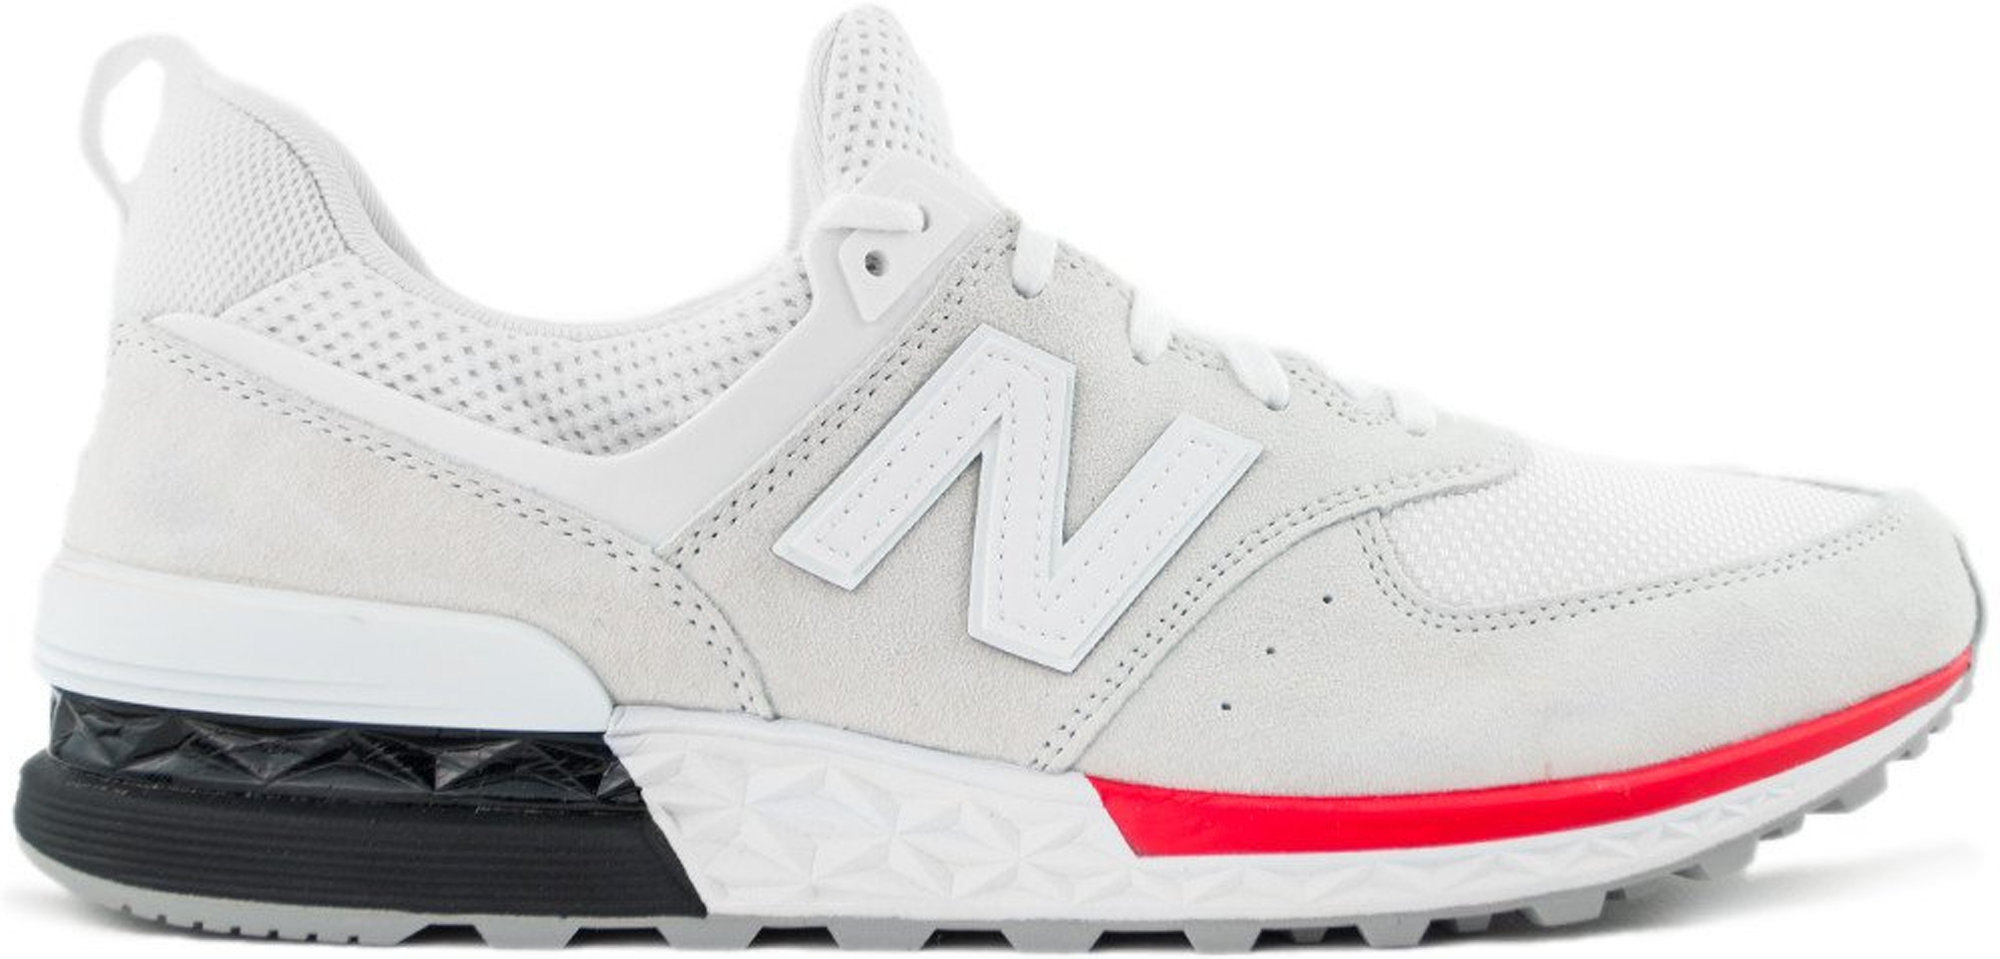 New Balance 574 Sport White Red - MS574AW